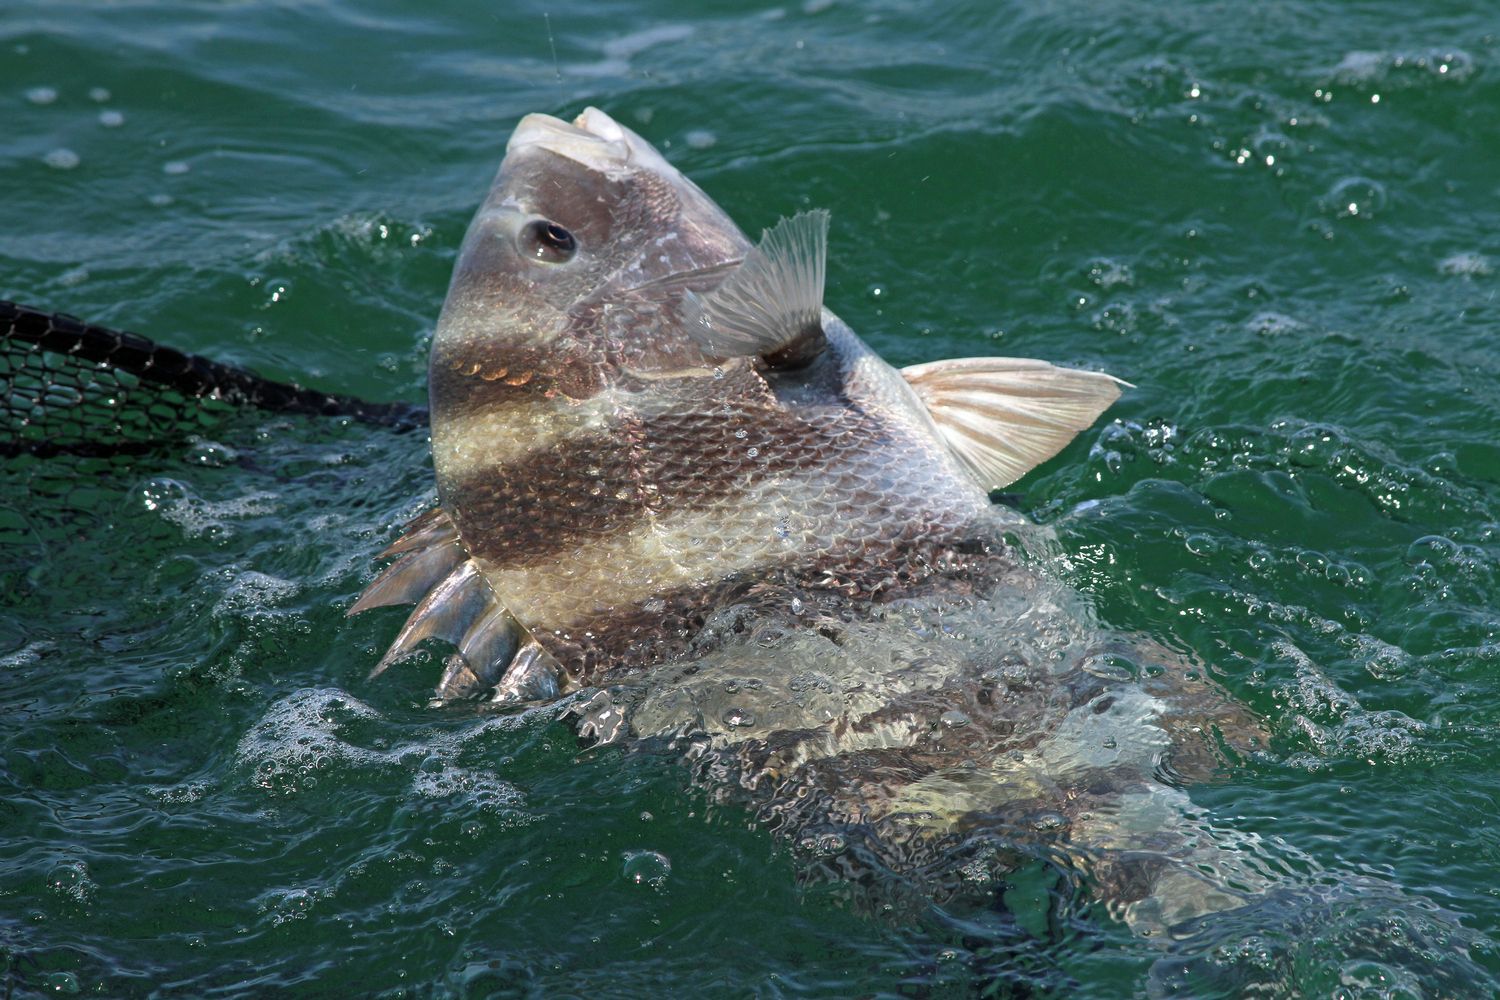 Sheepshead are aggregating to spawn on the Alabama Gulf Coast in February and March. Photo by David Rainer